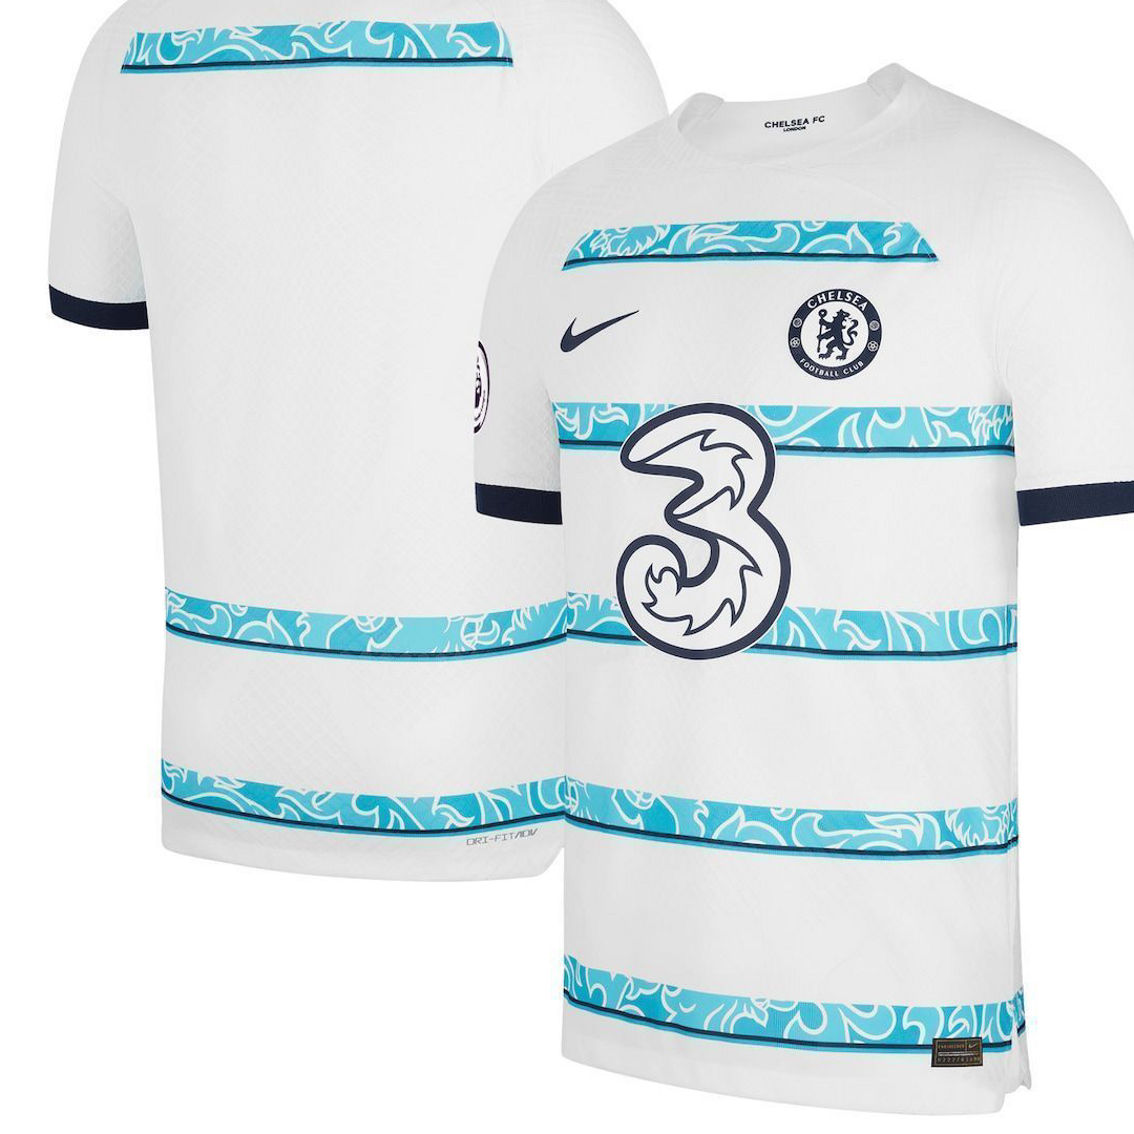 Nike Men's White Chelsea 2022/23 Away Vapor Match Authentic Blank Jersey - Image 2 of 4